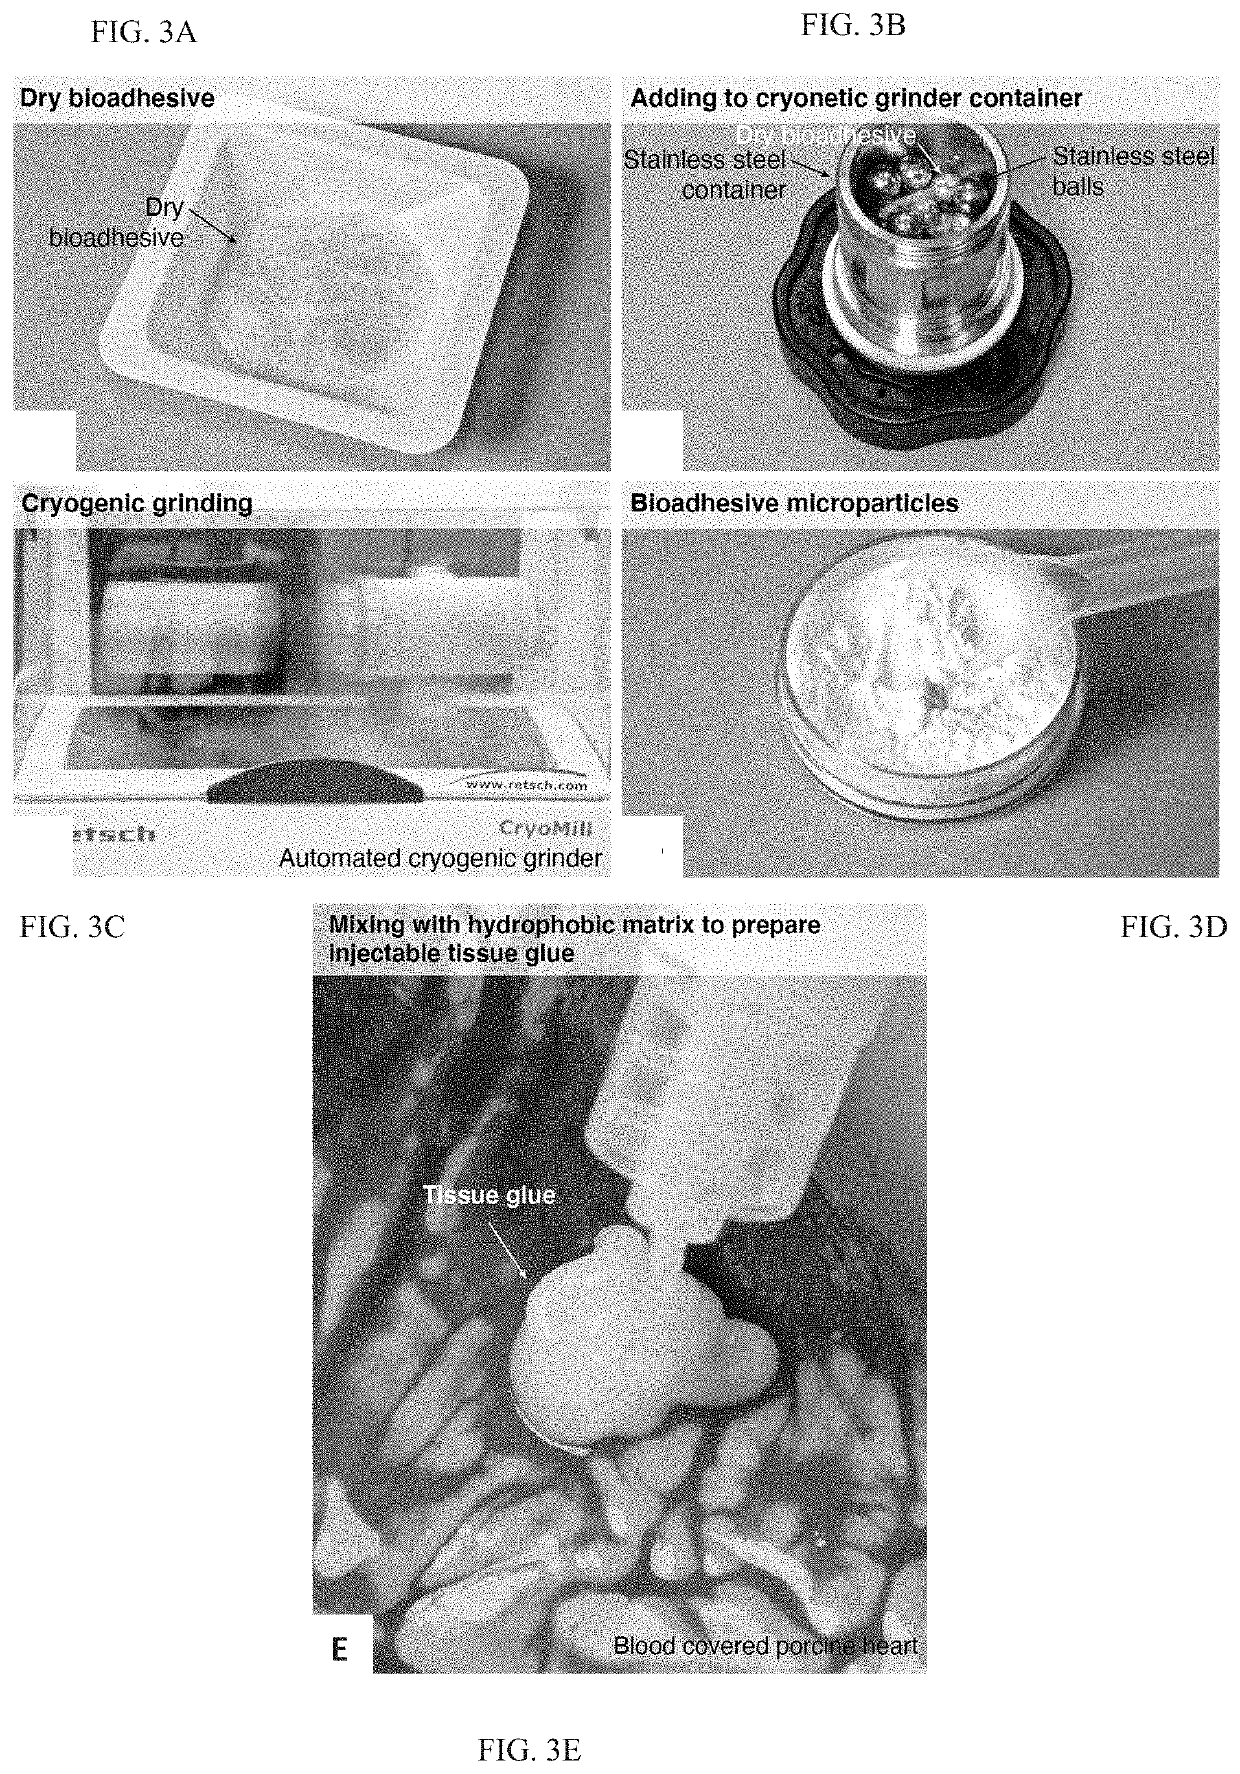 Body fluid resistant tissue adhesives